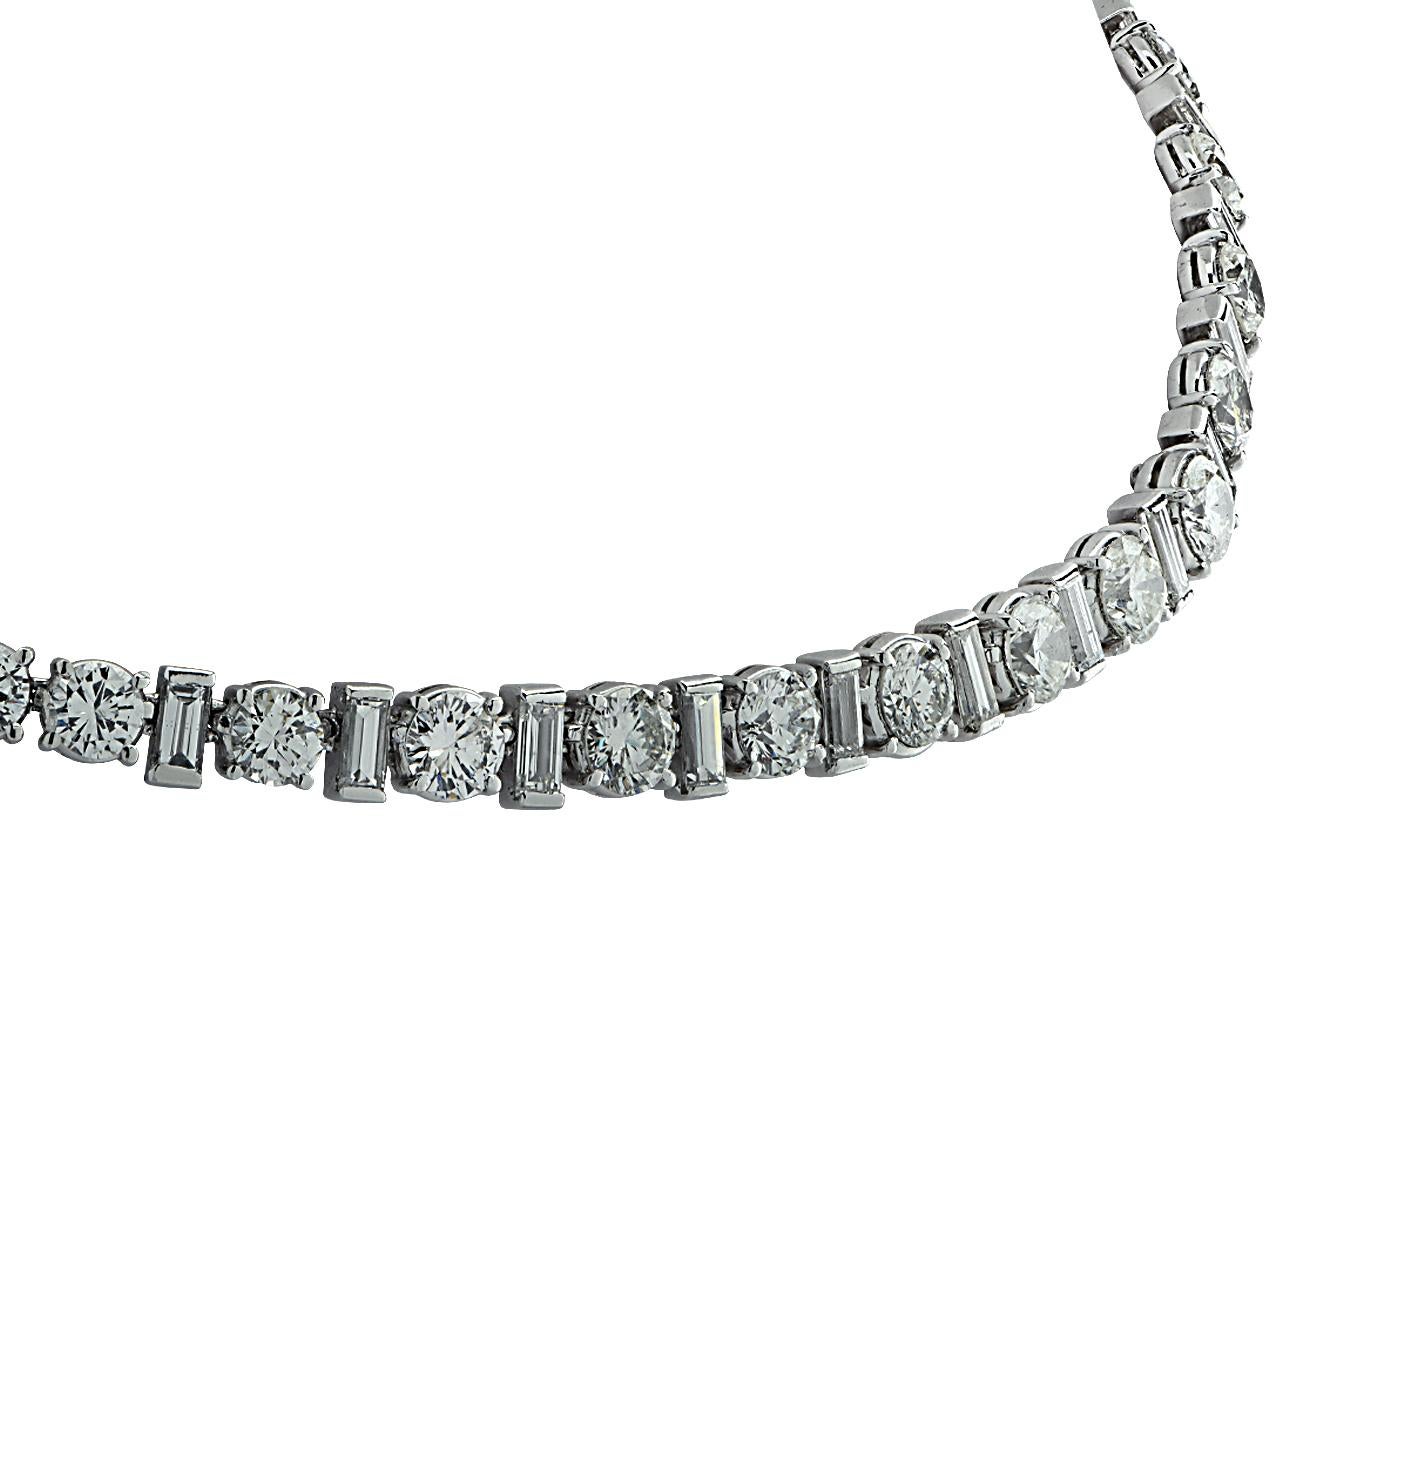 Spectacular diamond riviere necklace crafted in Platinum featuring 69 round brilliant cut diamonds weighing approximately 20.00 carats total, F-G color VS-SI clarity and 16 baguette cut diamonds weighing approximately 2.00 carats total, G color, VS